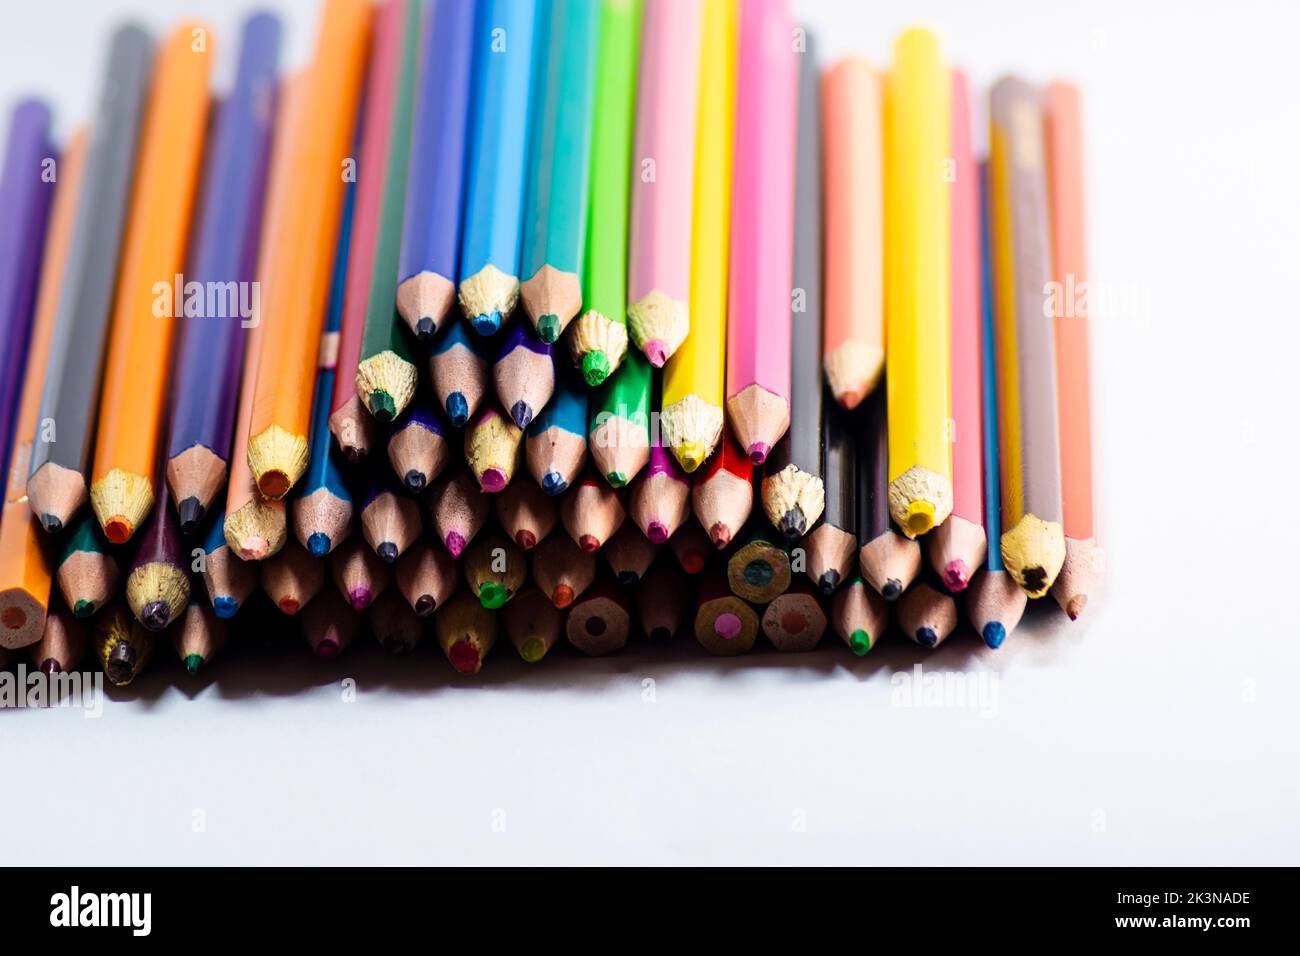 Colorful wooden pencils isolated on white background. close up Stock Photo